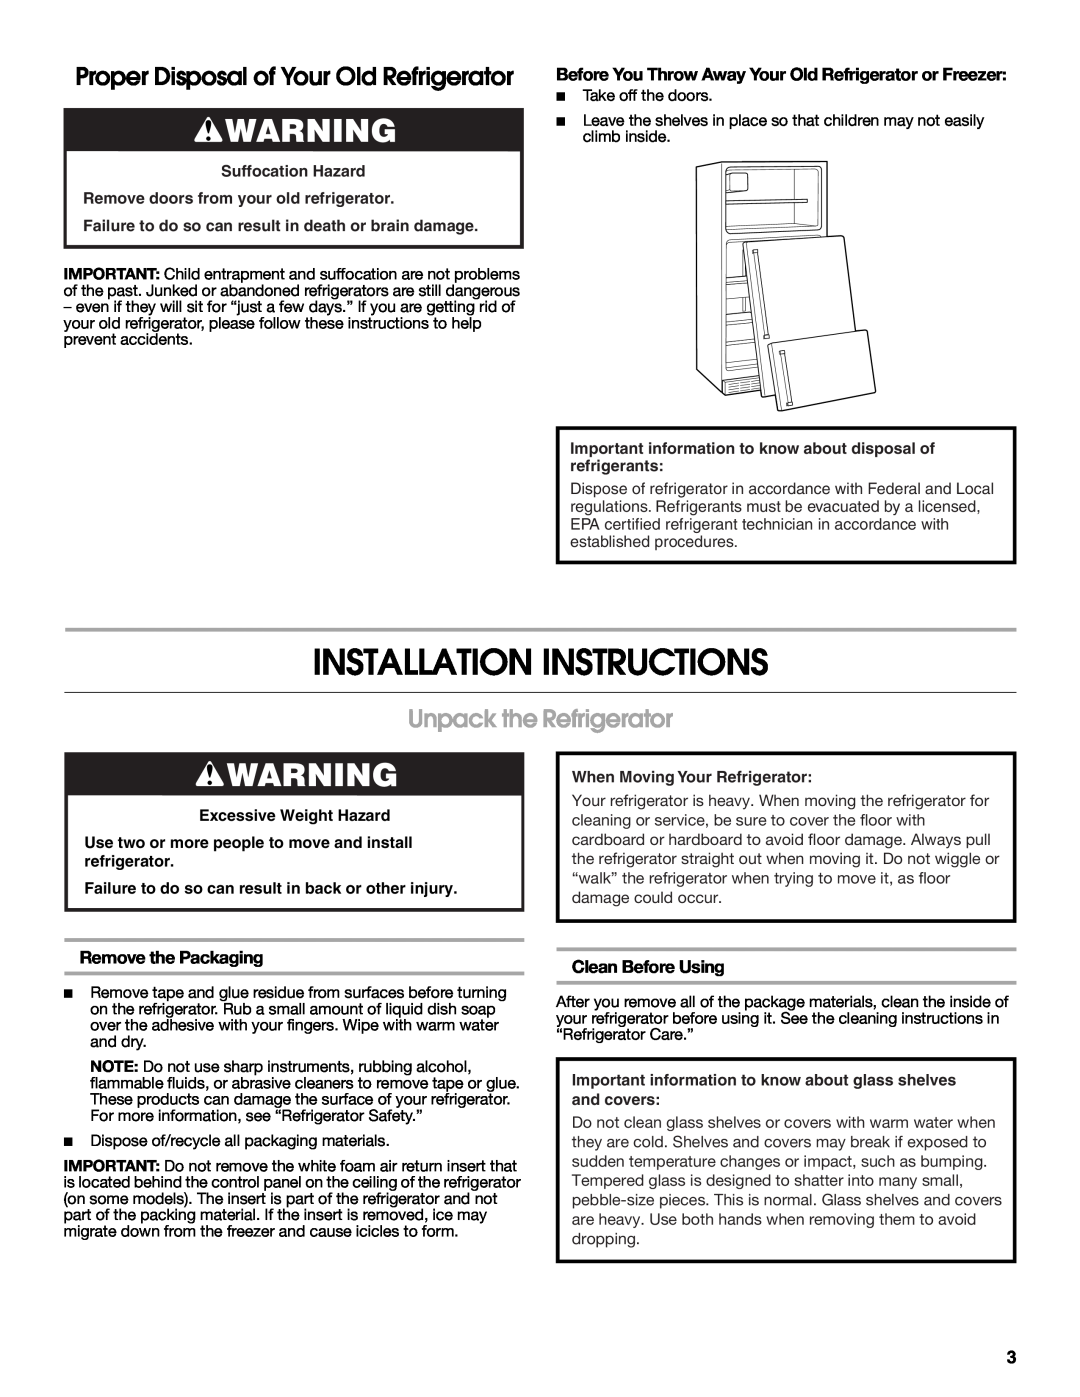 Whirlpool W10726840A Installation Instructions, Proper Disposal of Your Old Refrigerator, Unpack the Refrigerator 